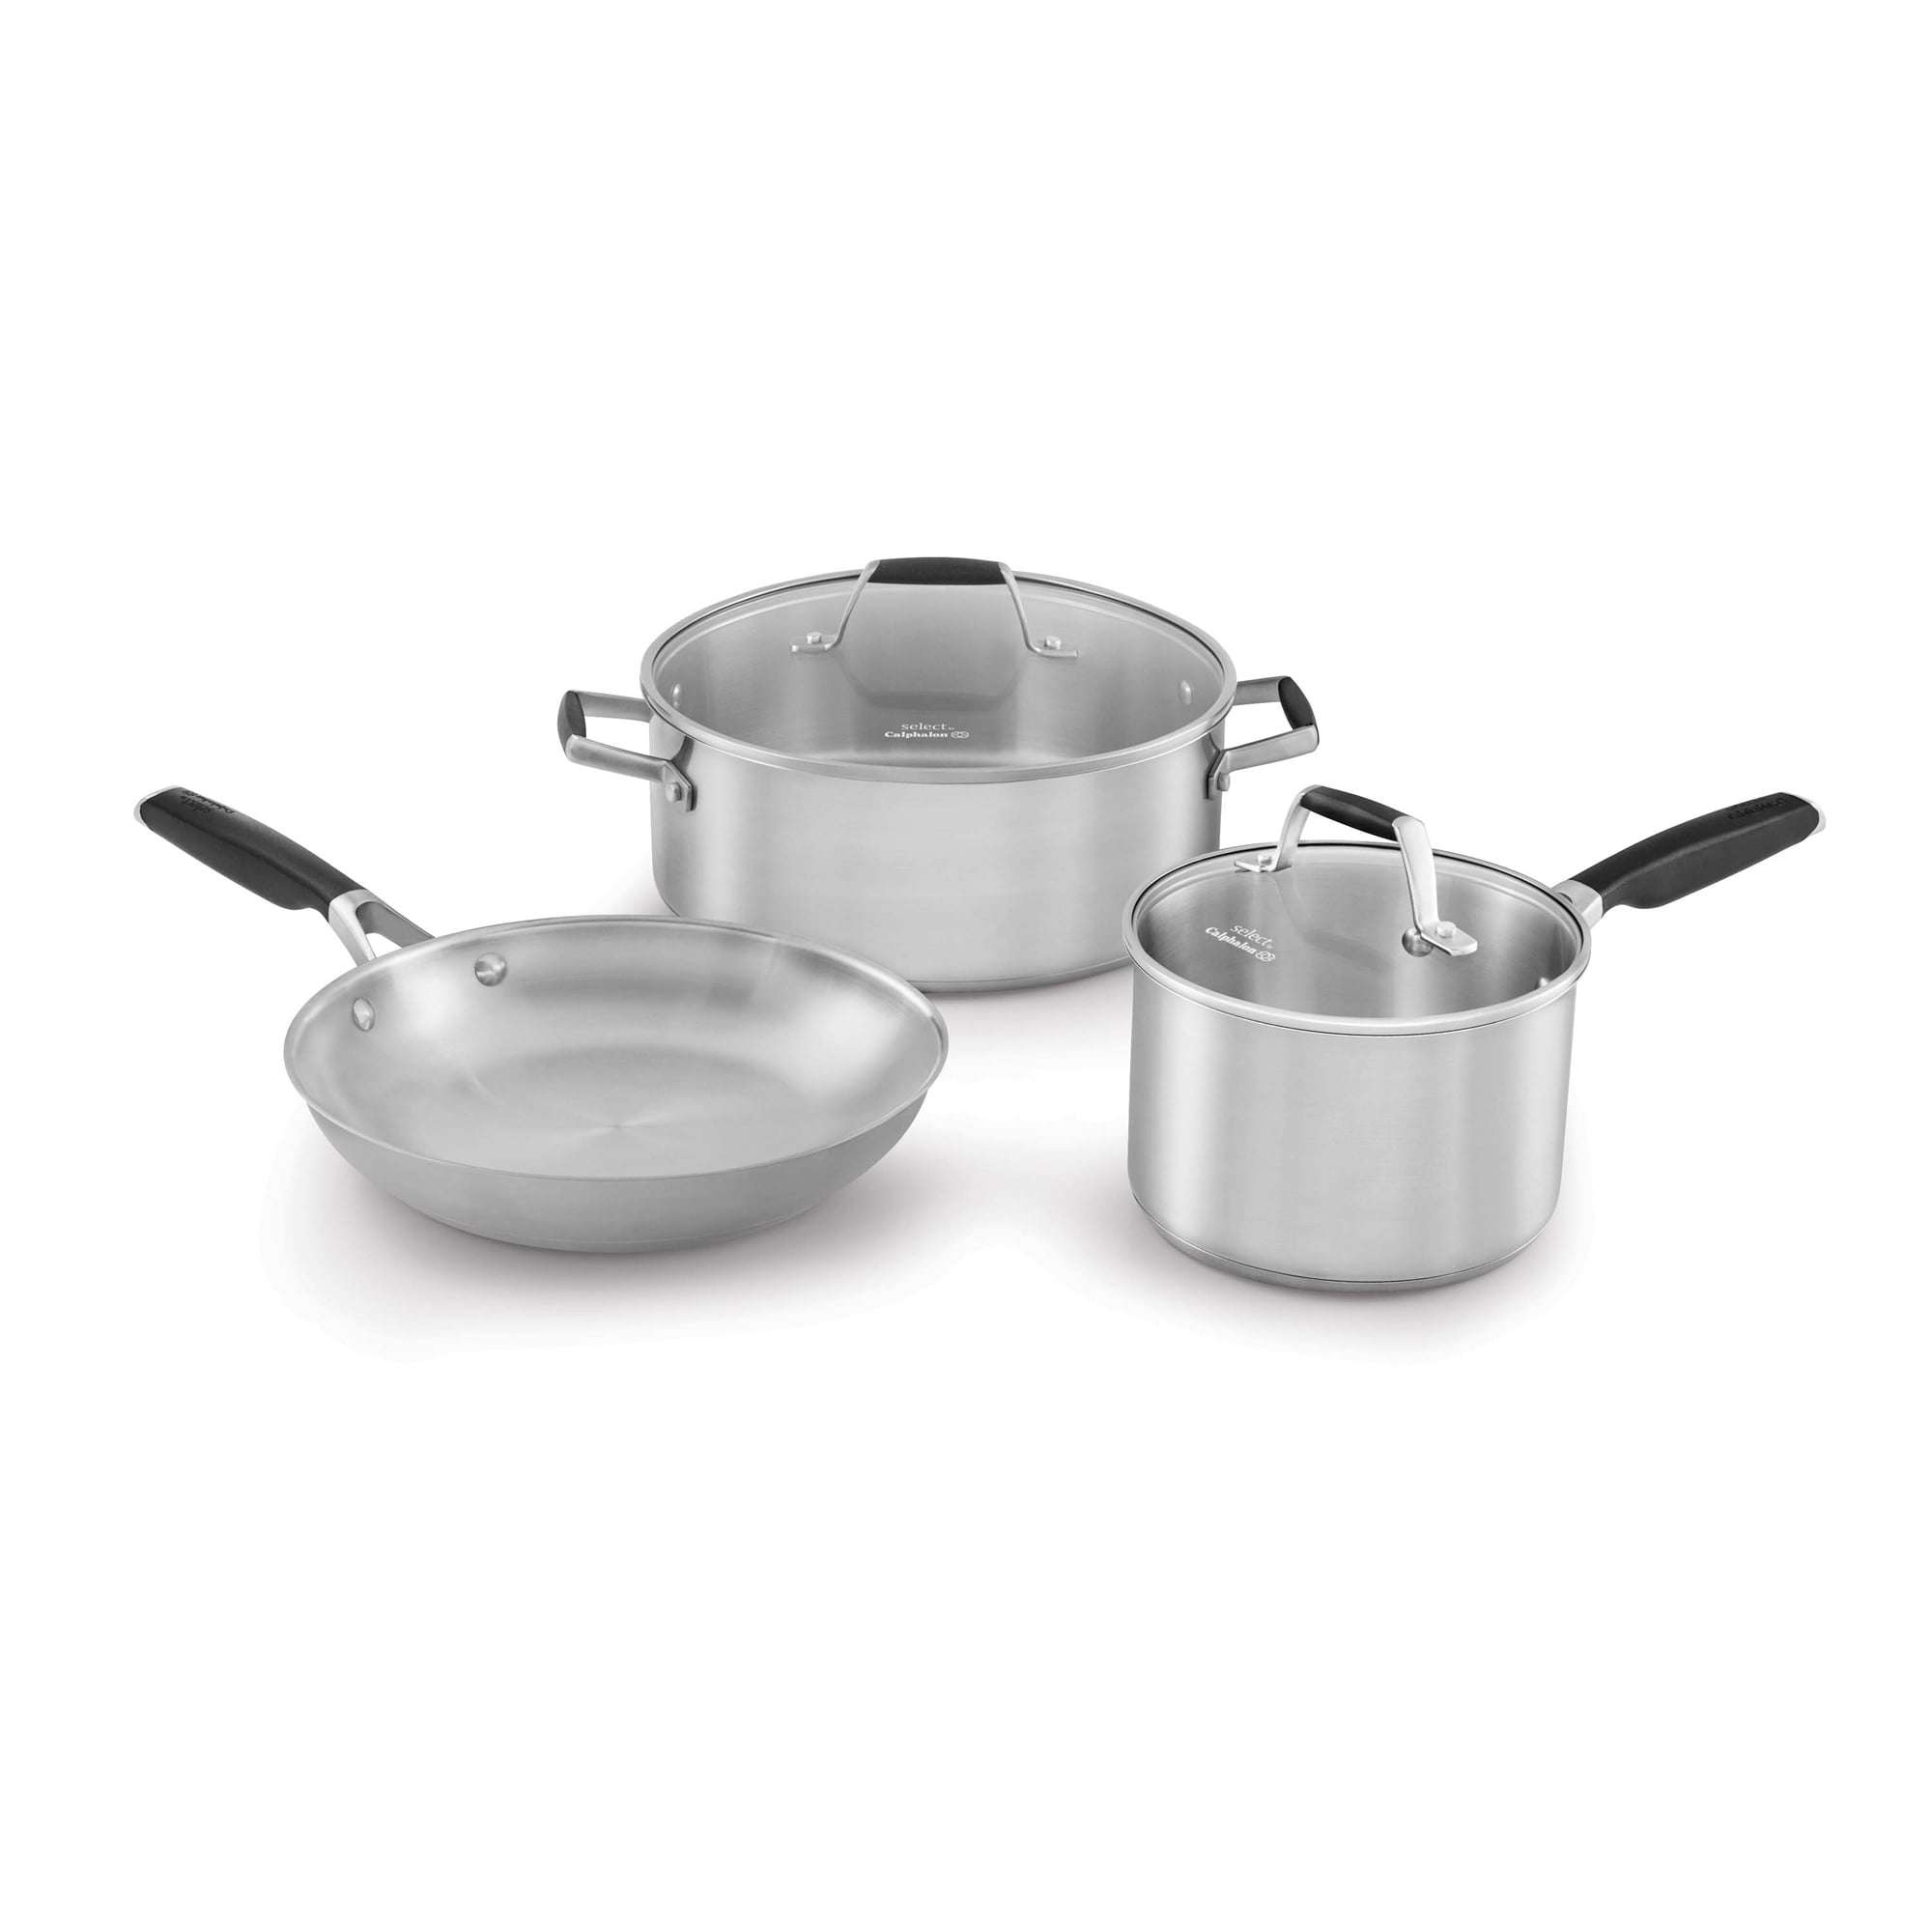  Calphalon 8-Piece Pots and Pans Set, Stainless Steel